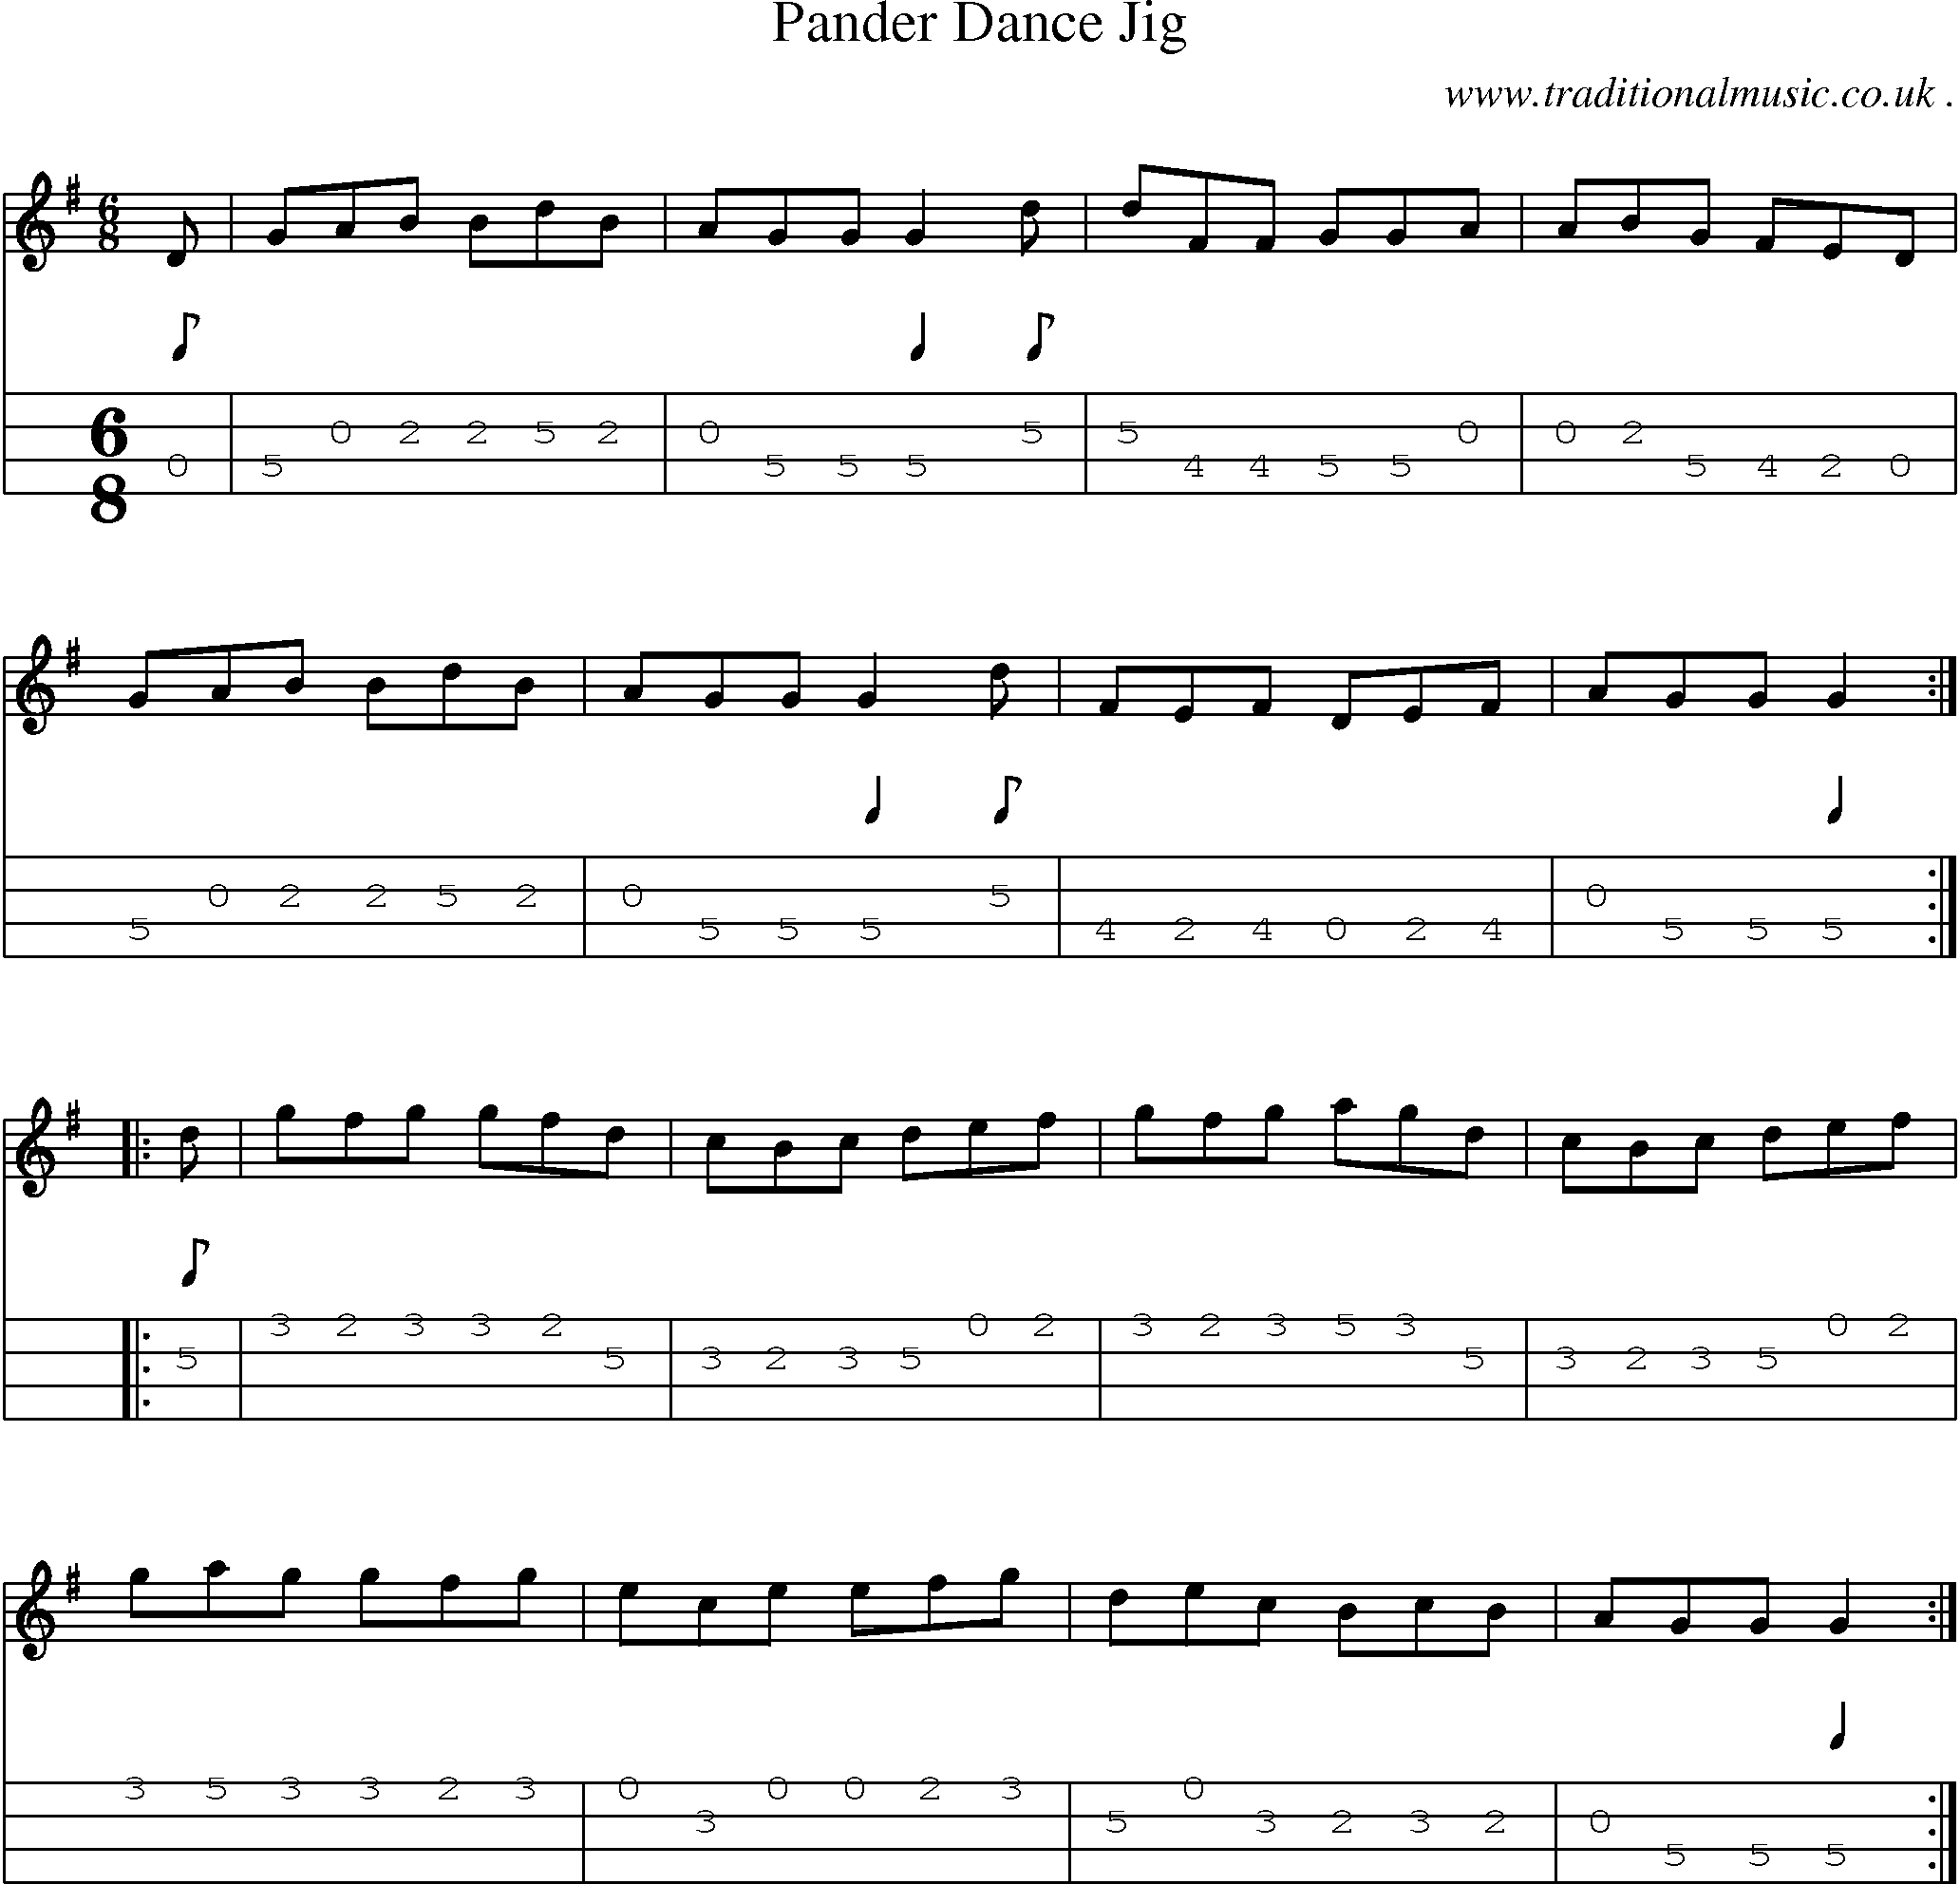 Sheet-Music and Mandolin Tabs for Pander Dance Jig